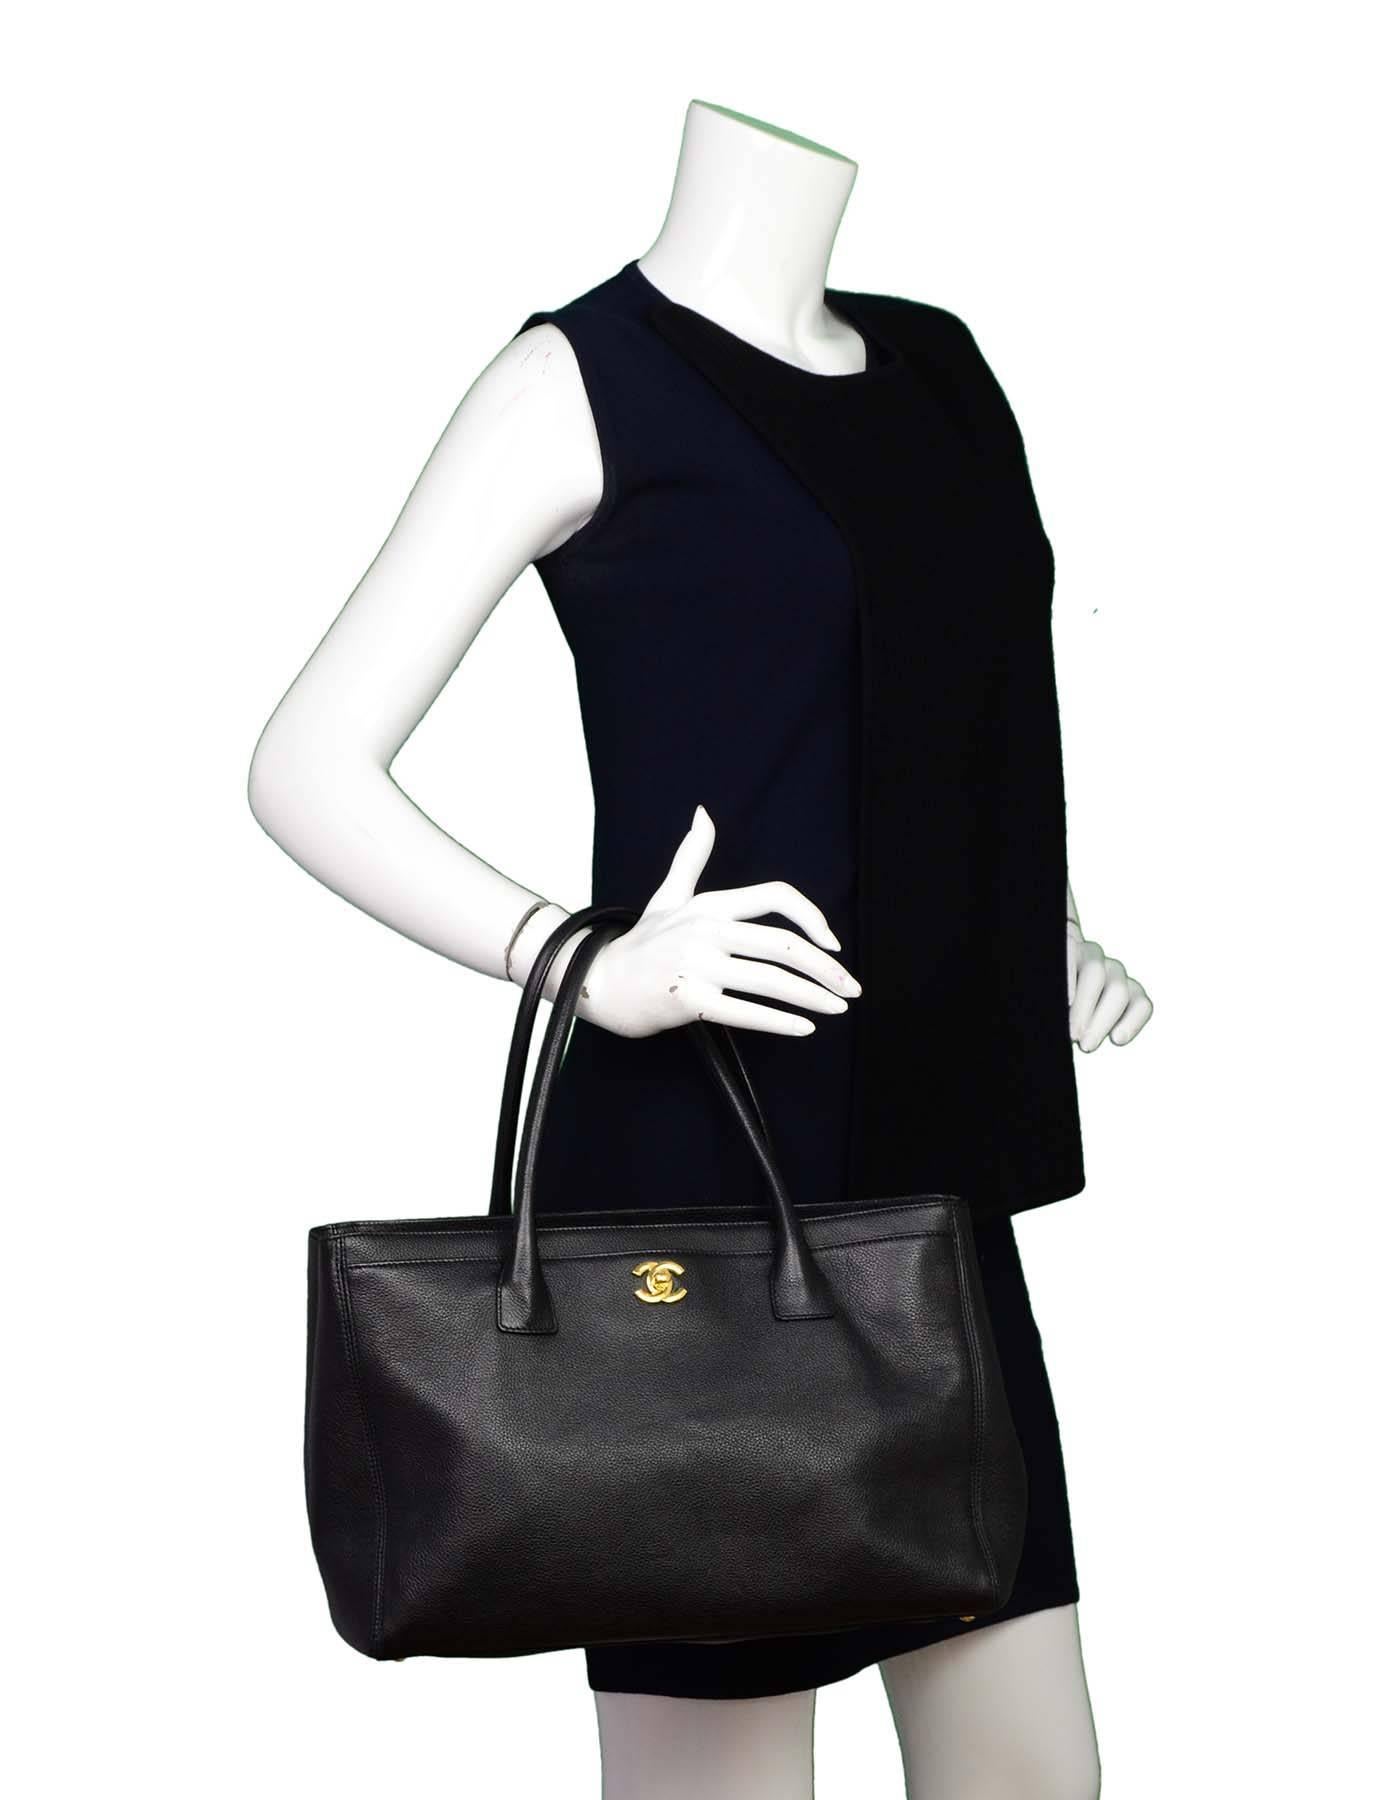 Chanel Black Leather Cerf Executive Tote
Features shoulder strap

Made In: Italy
Year of Production: 2011
Color: Black
Hardware: Goldtone
Materials: Leather, metal
Lining: Black textile
Closure/Opening: open top with center snap
Exterior